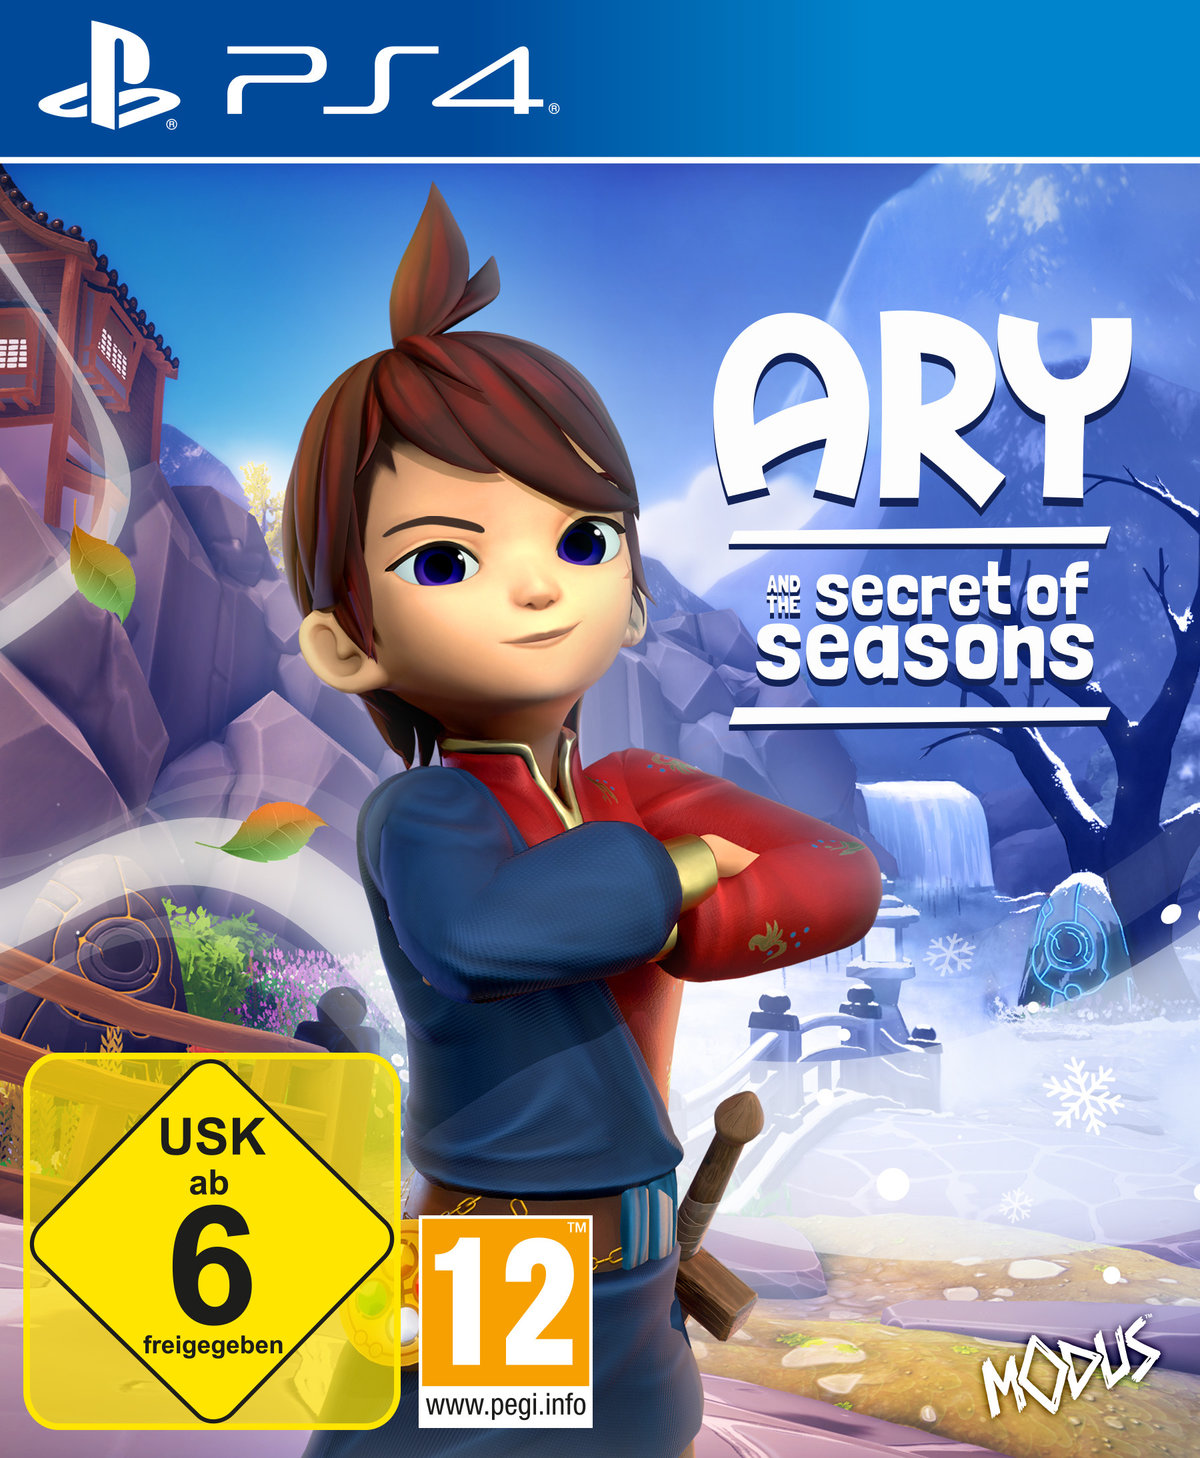 Ary and the Secret PS-4 of [PlayStation - Seasons 4